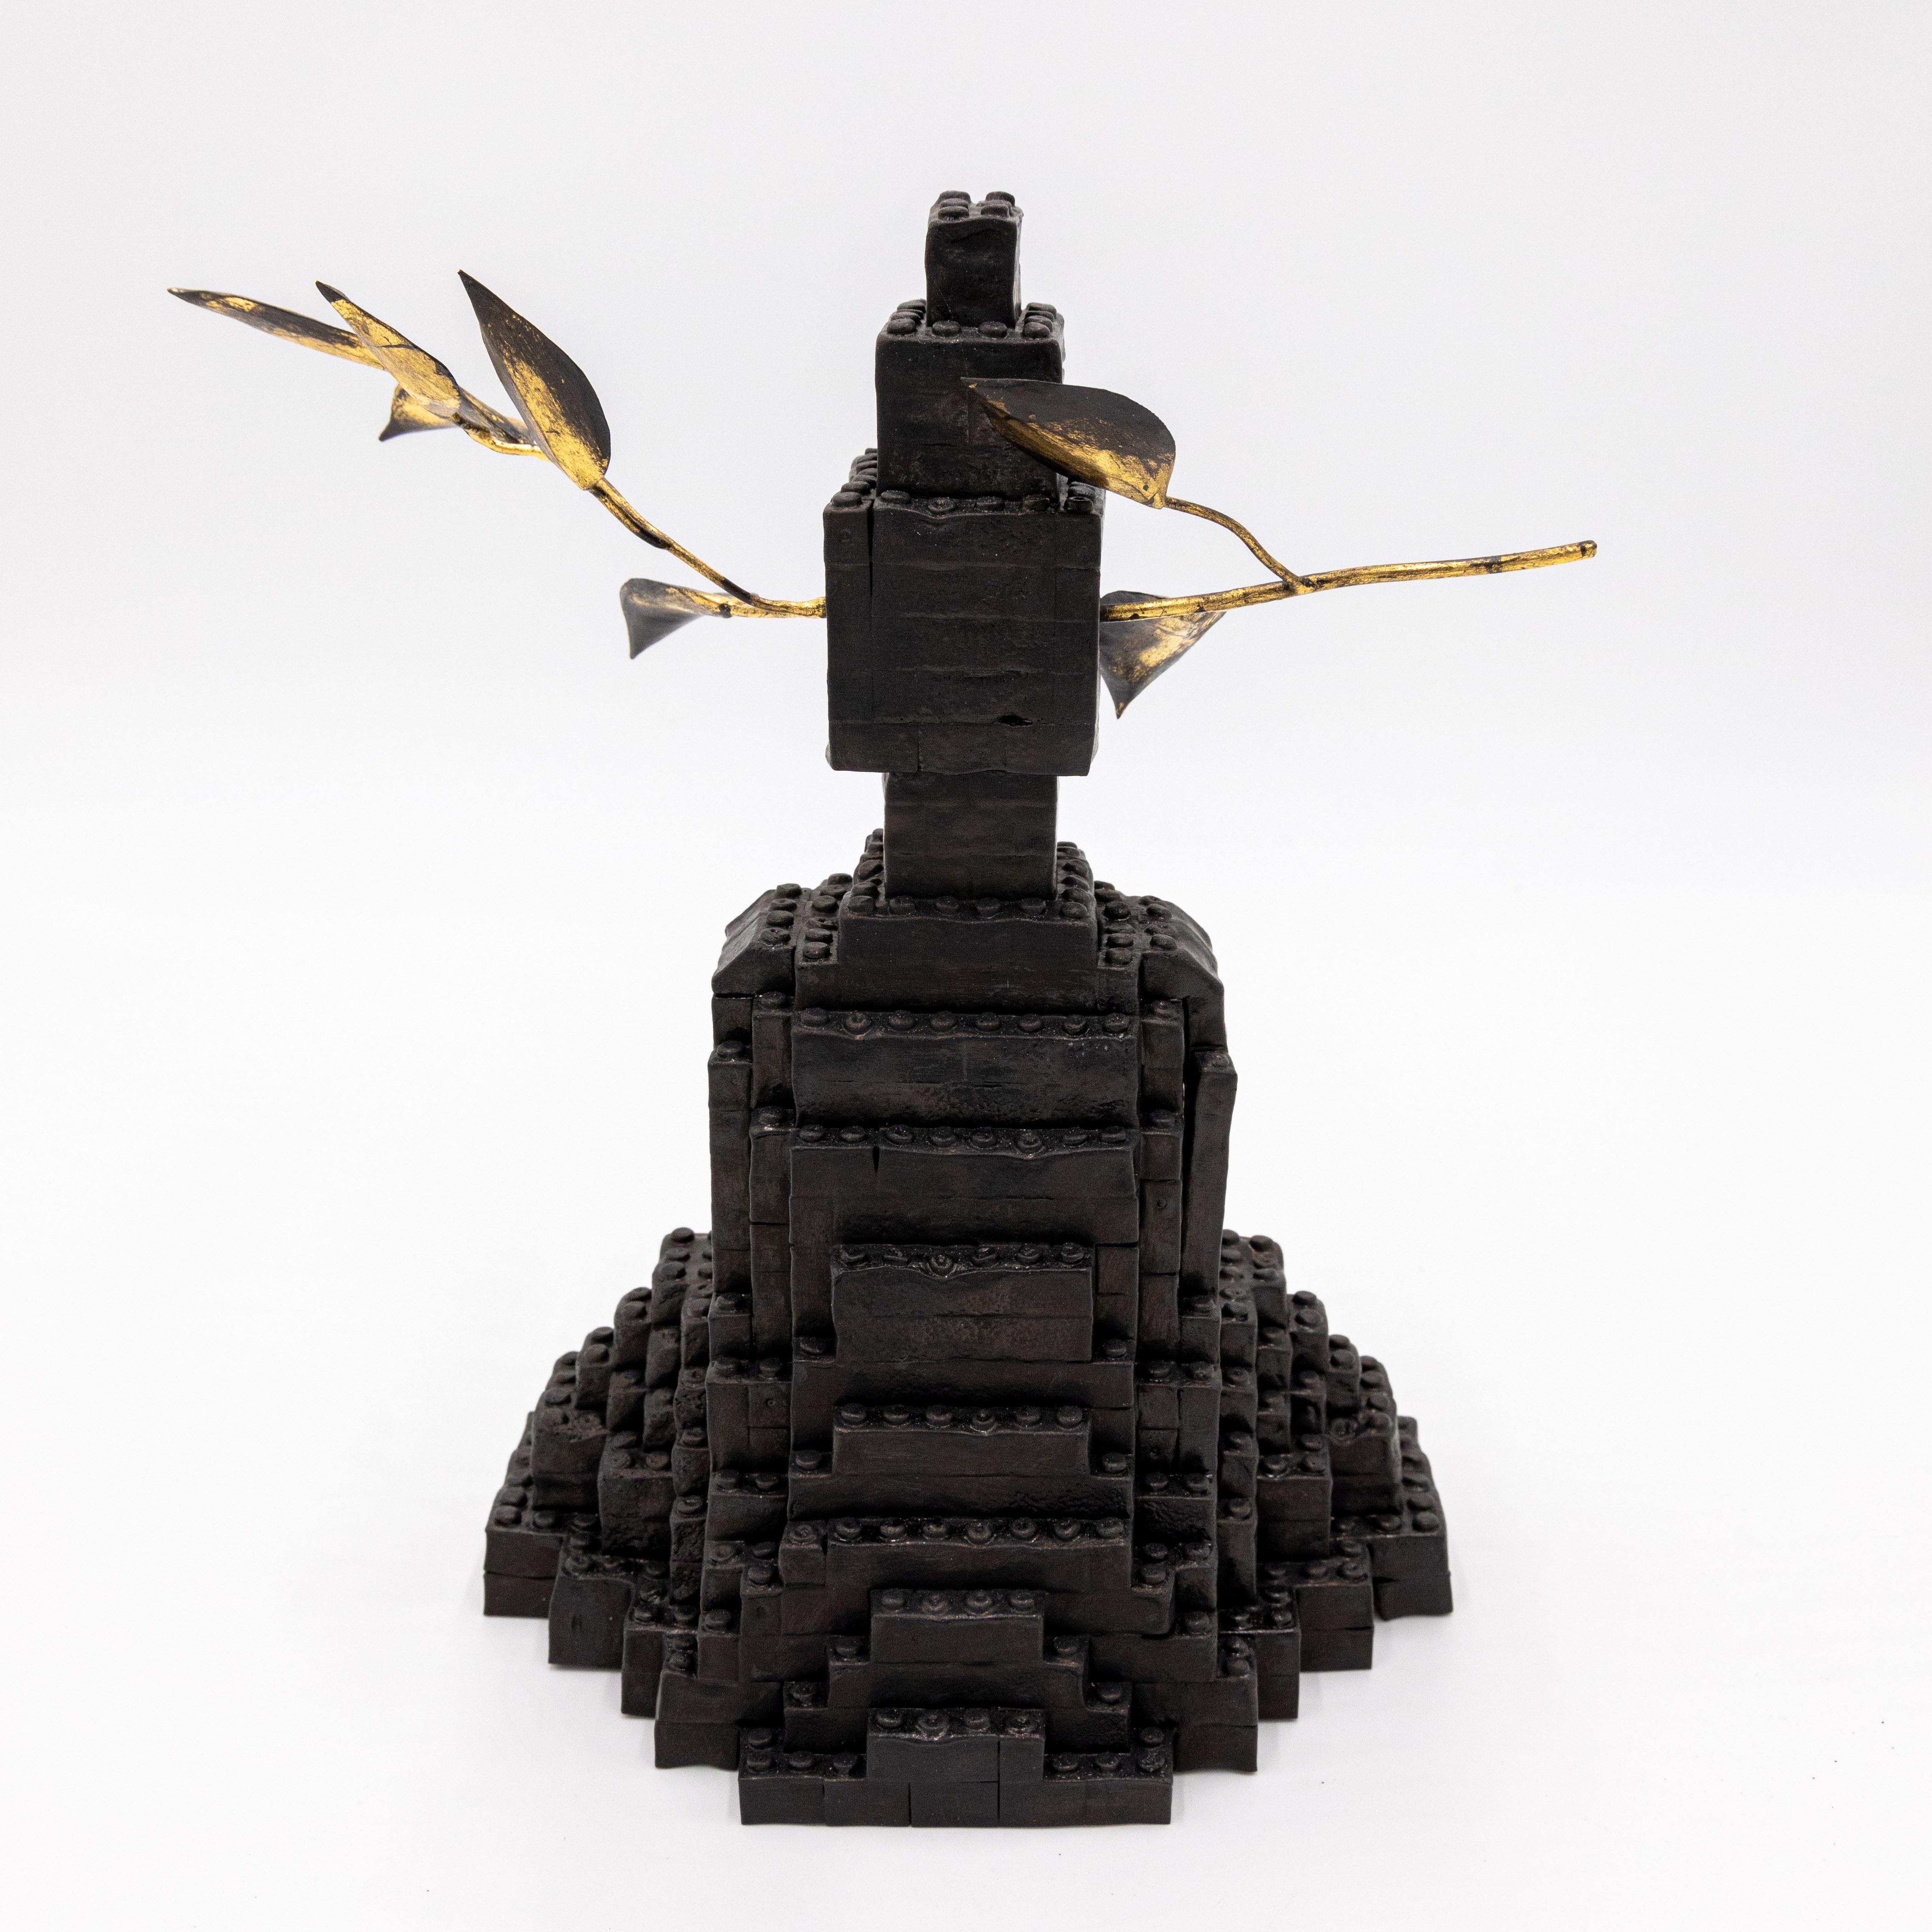 Lego, bayberry wood, copper wire, cashew lacquer, gold leaf

This collaborative work, which began with a common interest in Buddhism, explored the idea of expressing the sacred within everyday life.

As artist and Zen monk Hasegawa says, “Buddhism